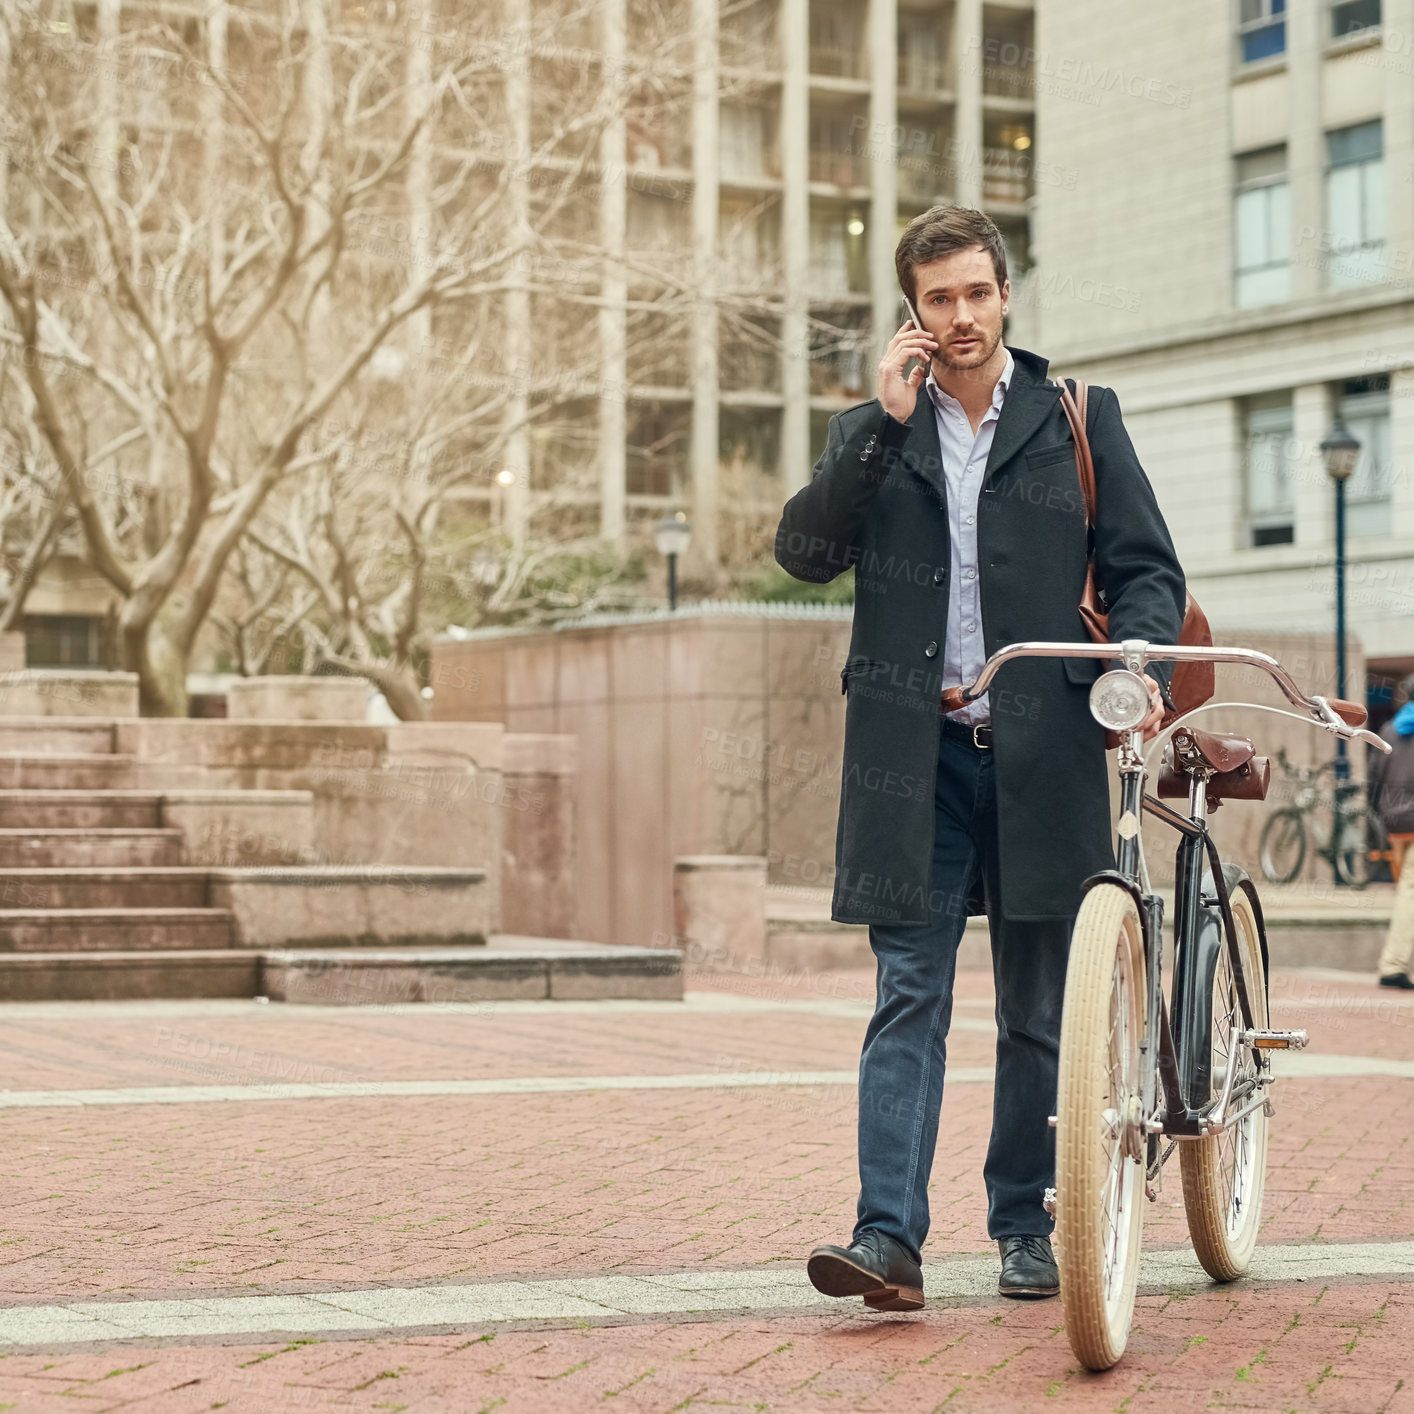 Buy stock photo Portrait of a young businessman commuting to work with his bicycle